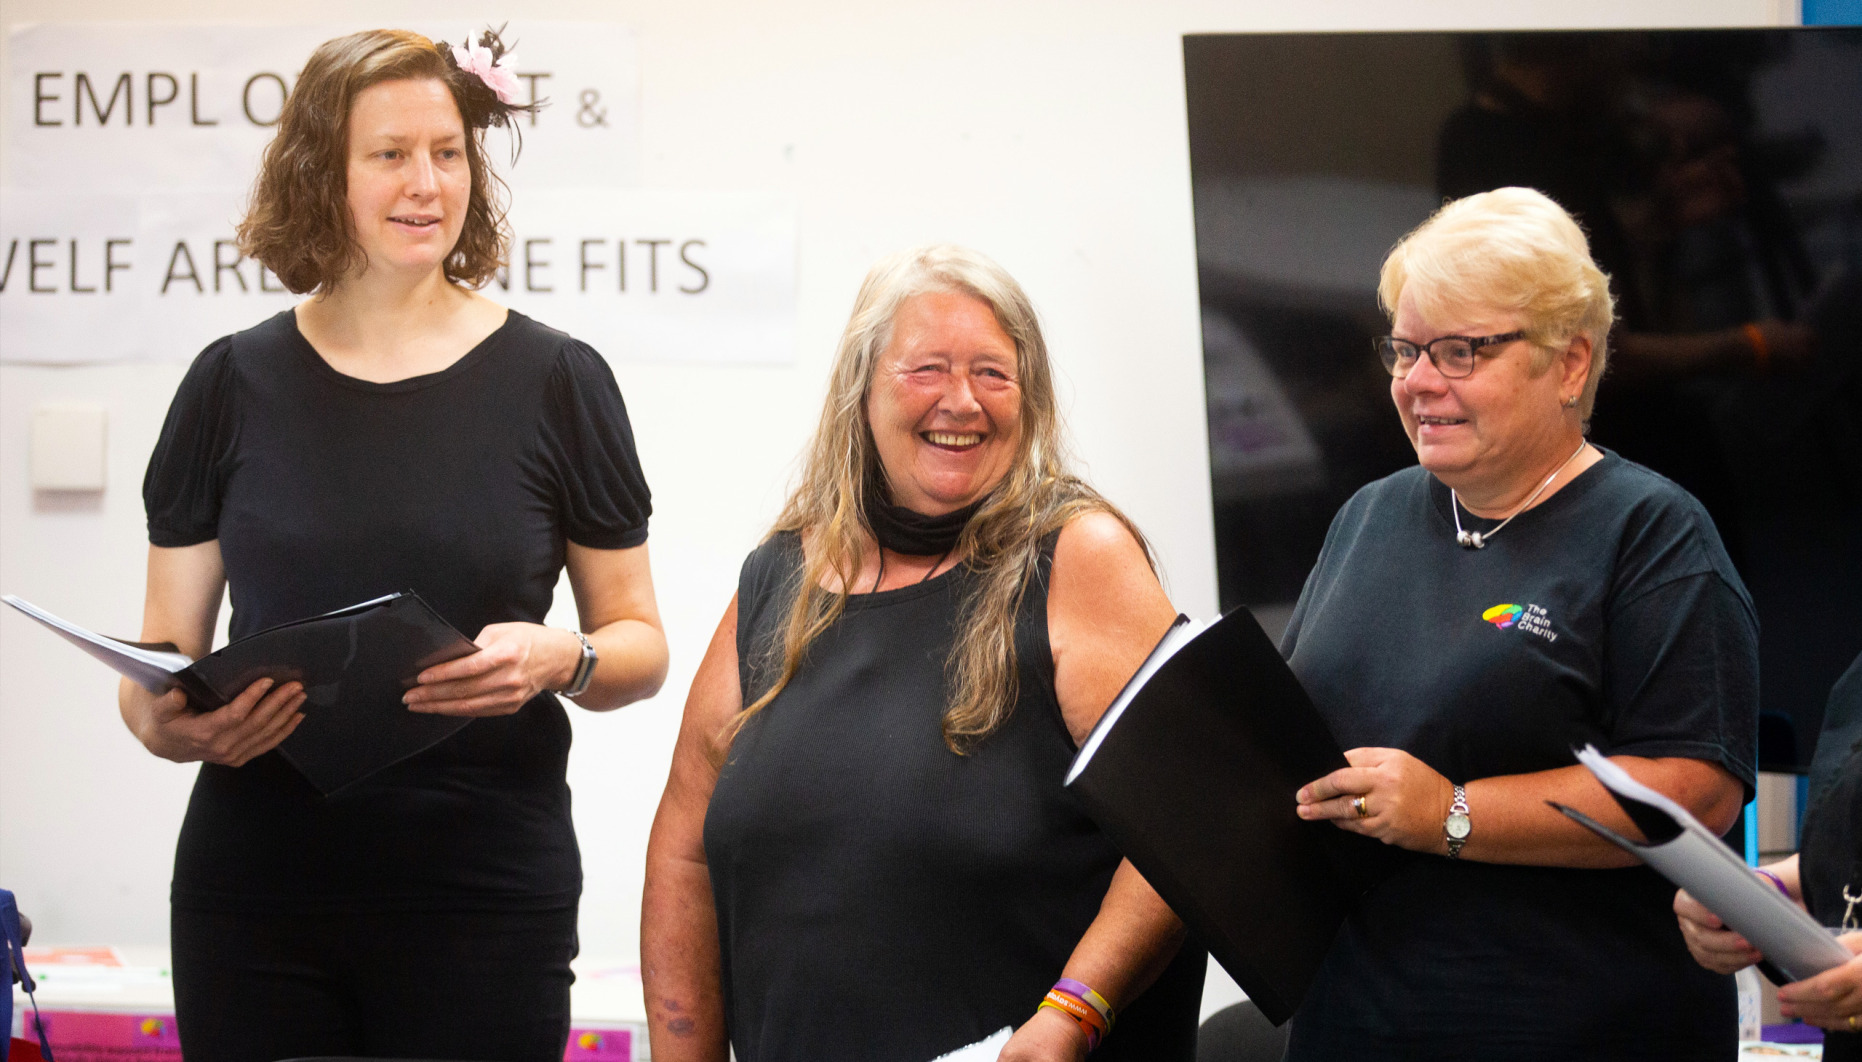 Members of The Brain Charity's sing and a social group performing at an event